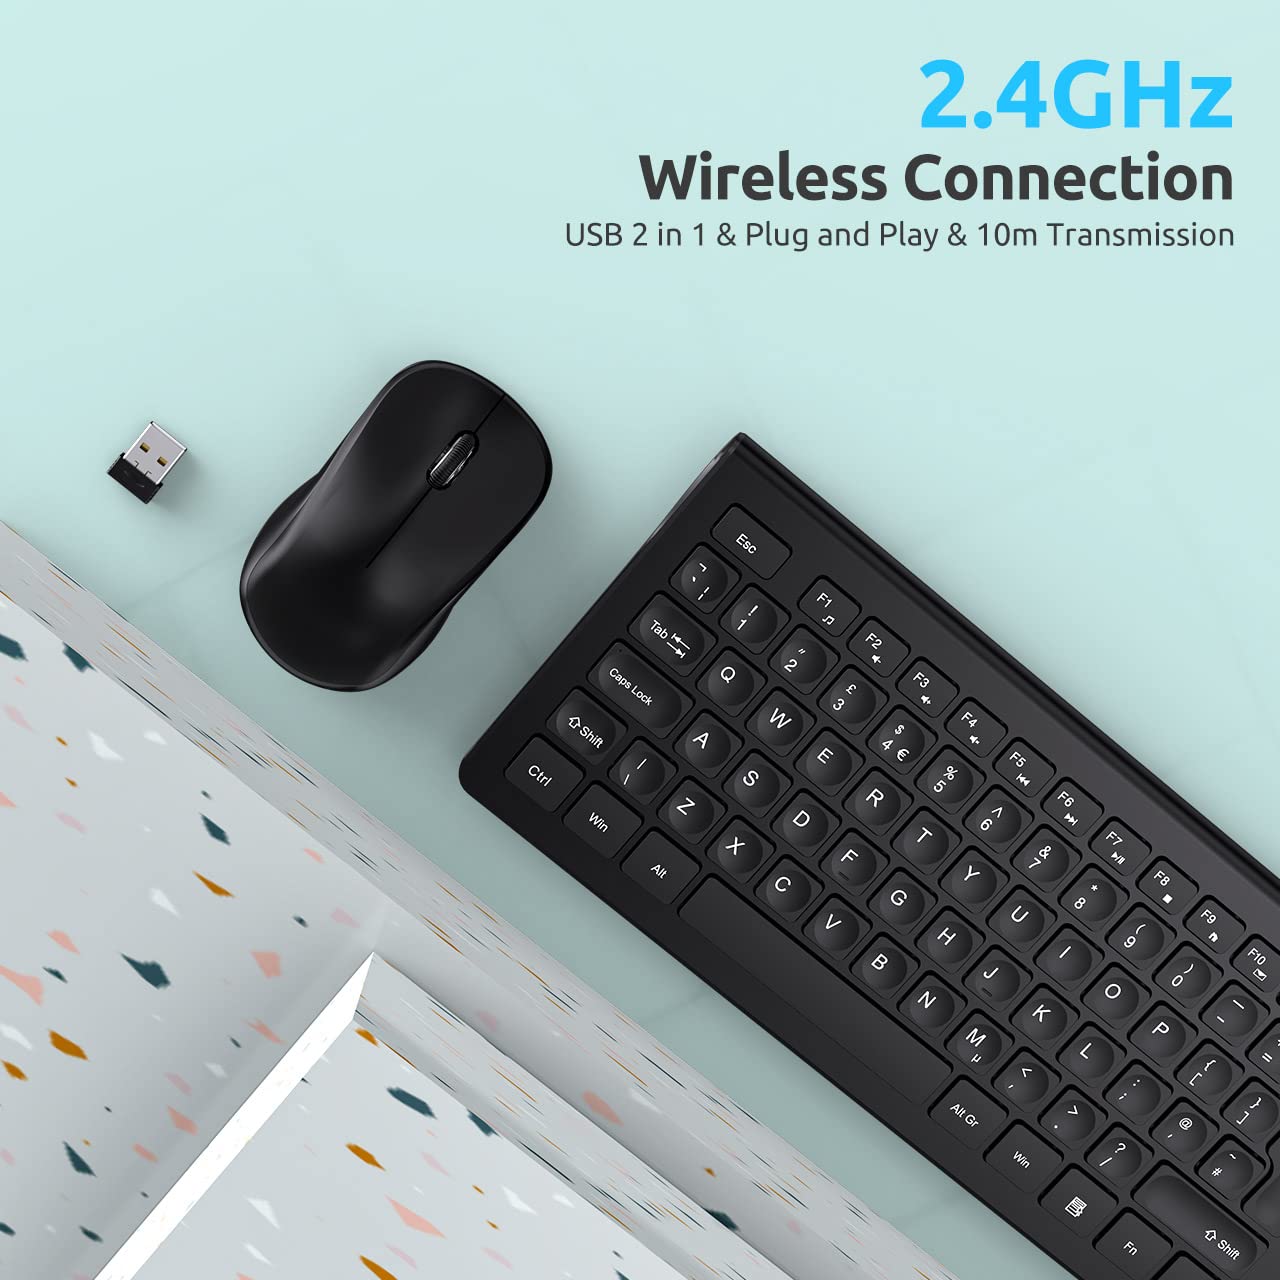 Wireless Keyboard and Mouse Set UK, Energy Saving, 2,4 GHz Ergonomic Full Size Keyboard with Micro Concave Keycaps, Silent Cordless Mouse, for Windows, Computer, PC, Laptop, Home Office - Black